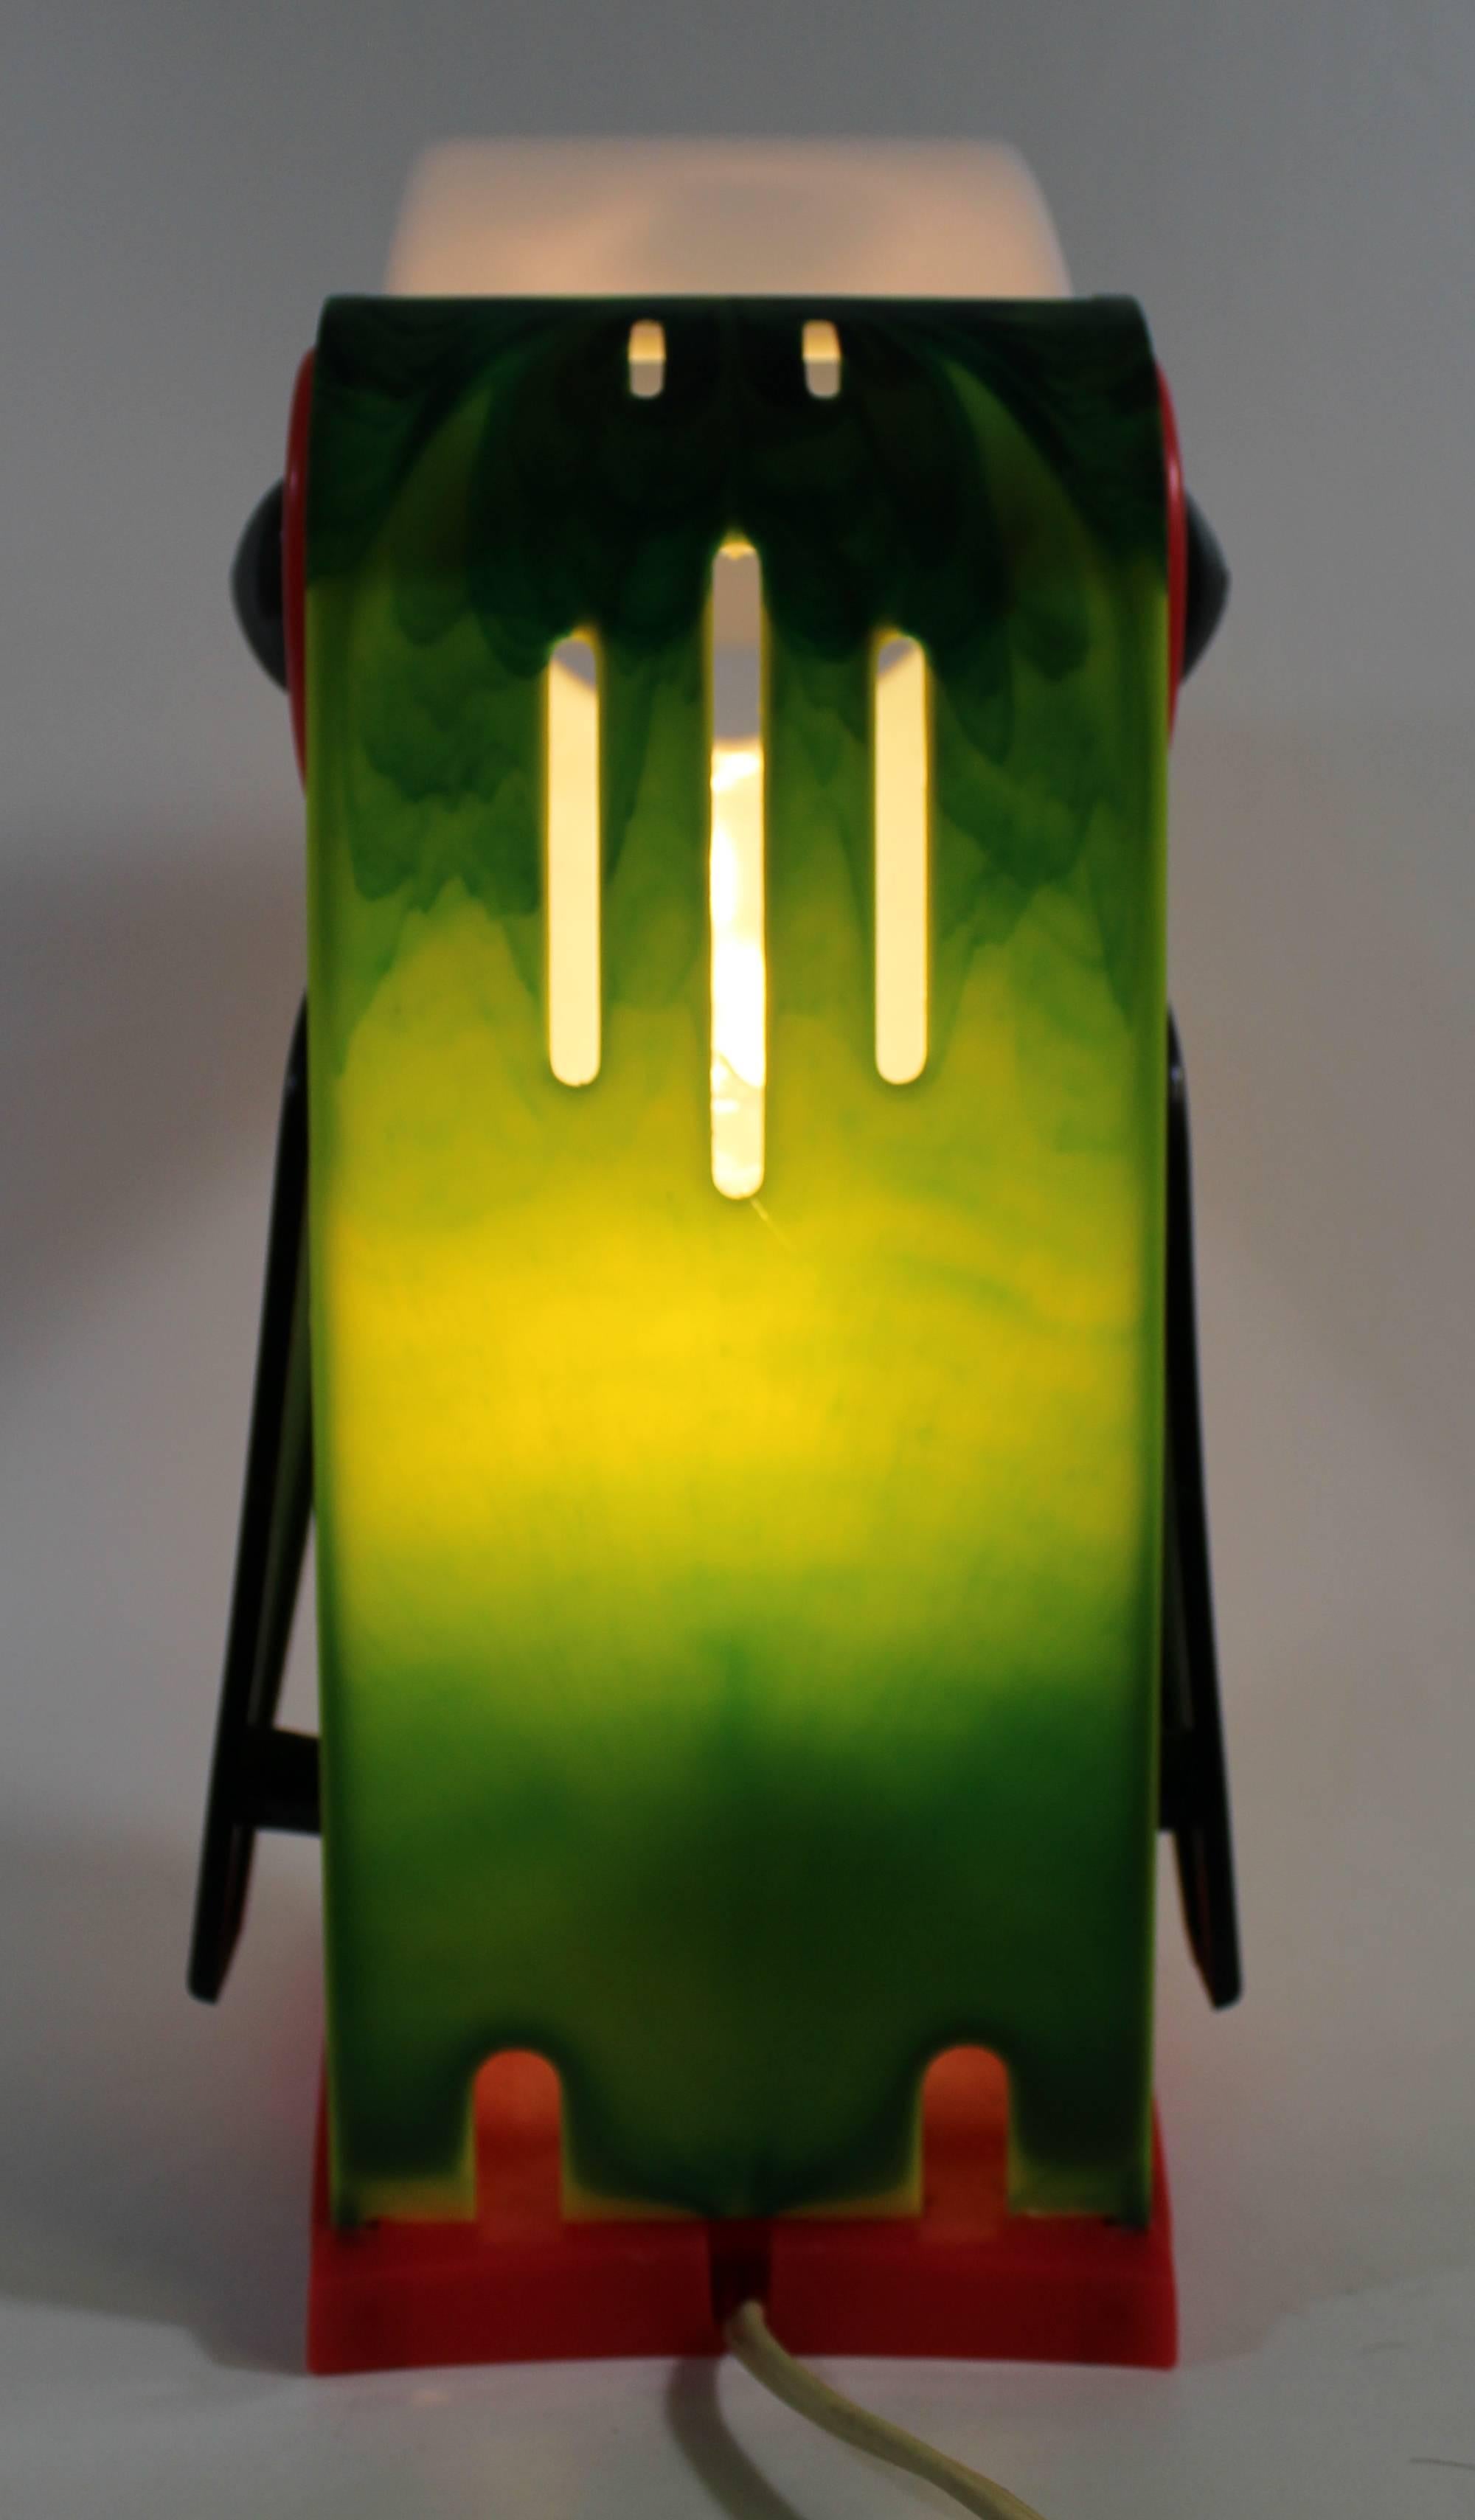 Toucan Lamp by Gilbert, Mid-Century Modern!

Free shipping within the United States and Canada.